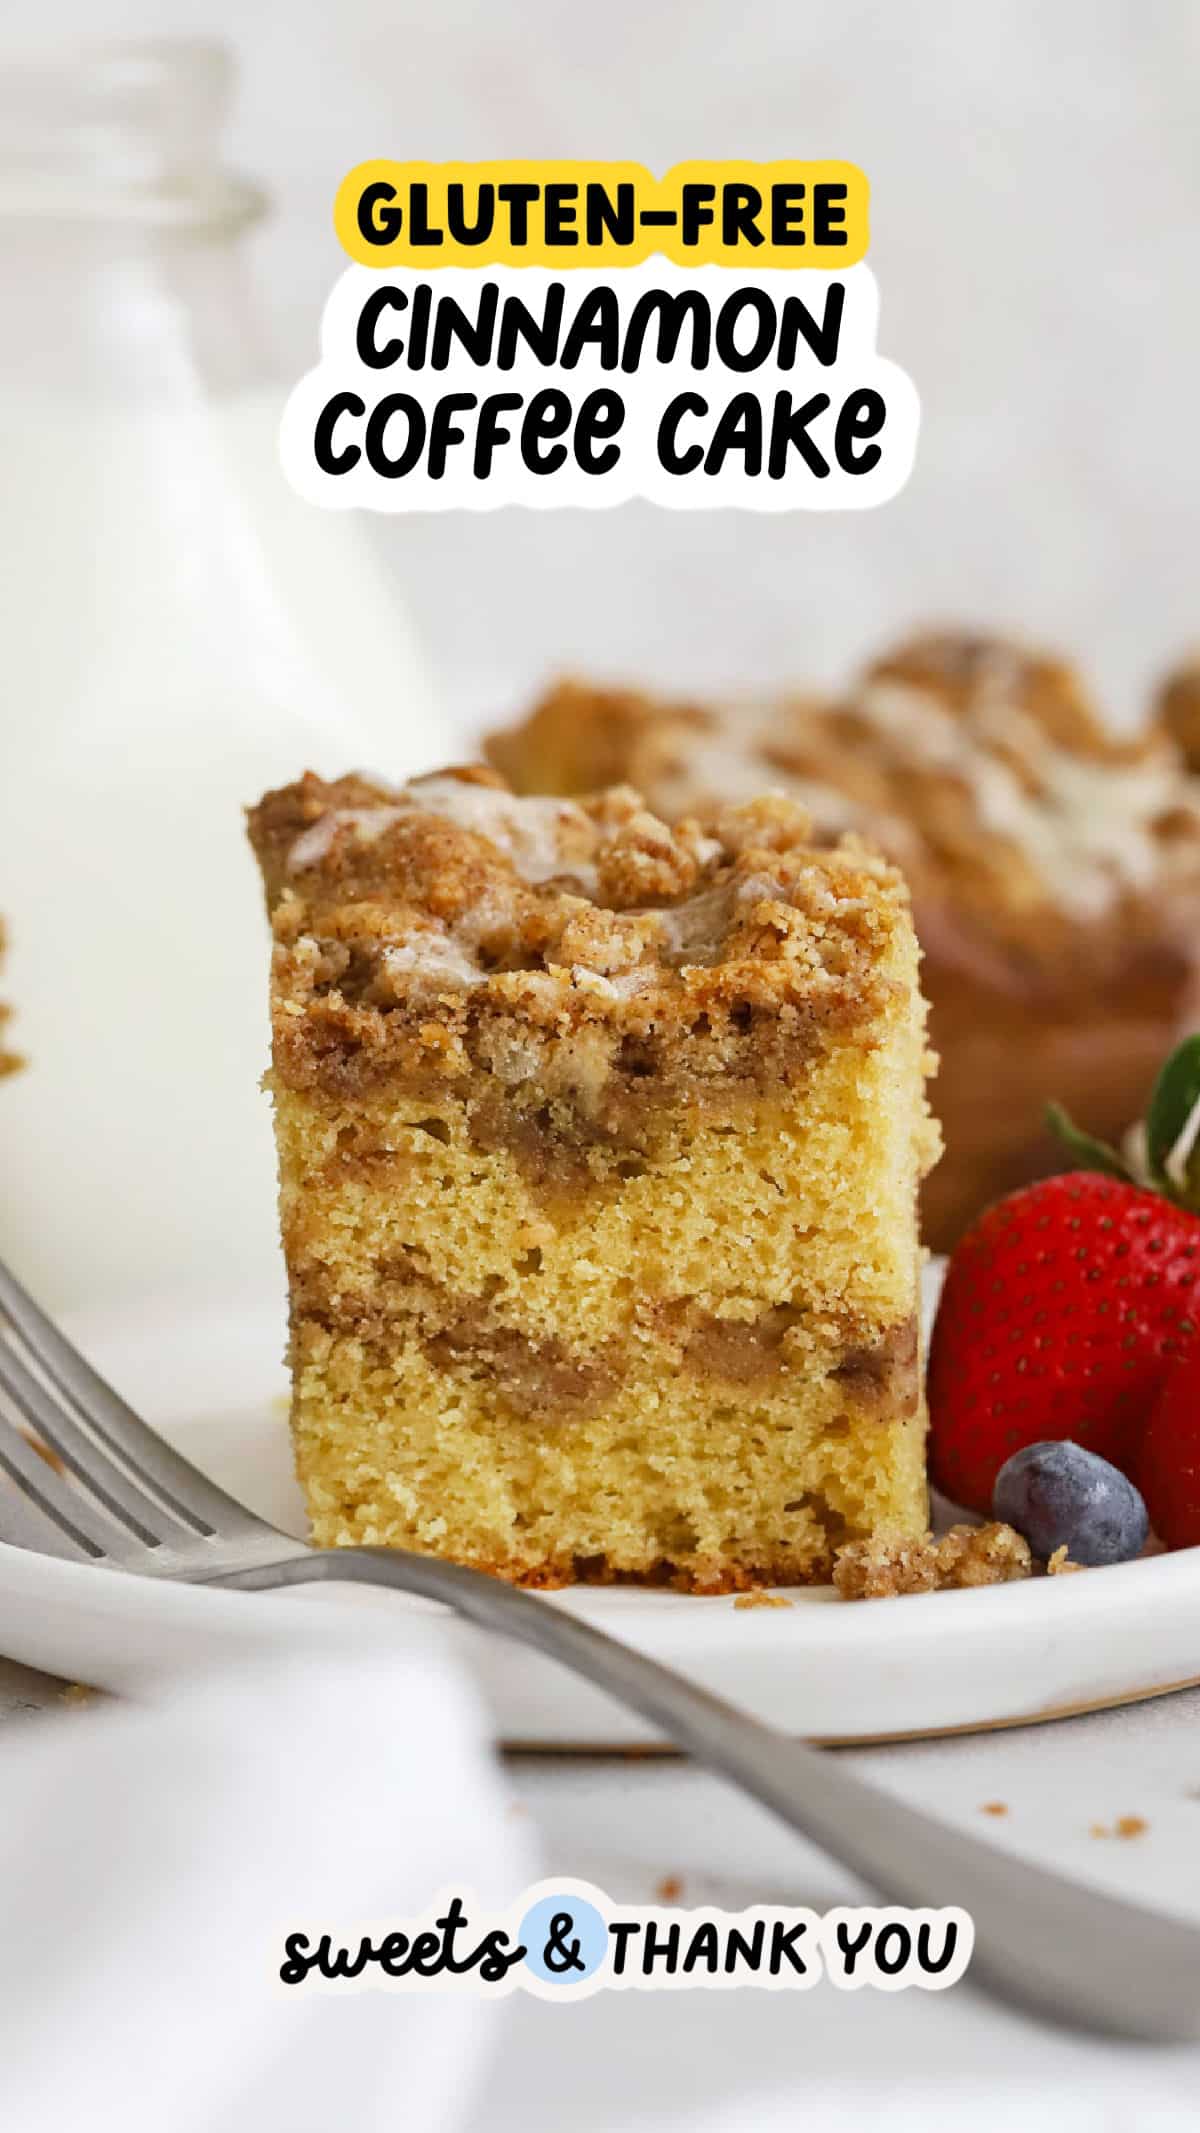 Our Gluten-Free Cinnamon Coffee Cake recipe has all the classic flavor you love, simply made gluten-free! This gluten-free crumb cake might just become your new favorite holiday breakfast. We combine fluffy, buttery vanilla cake with two layers of brown sugar cinnamon streusel topping for a delicious special occasion breakfast treat your whole family will love. Get the recipe at sweetsandthankyou.com